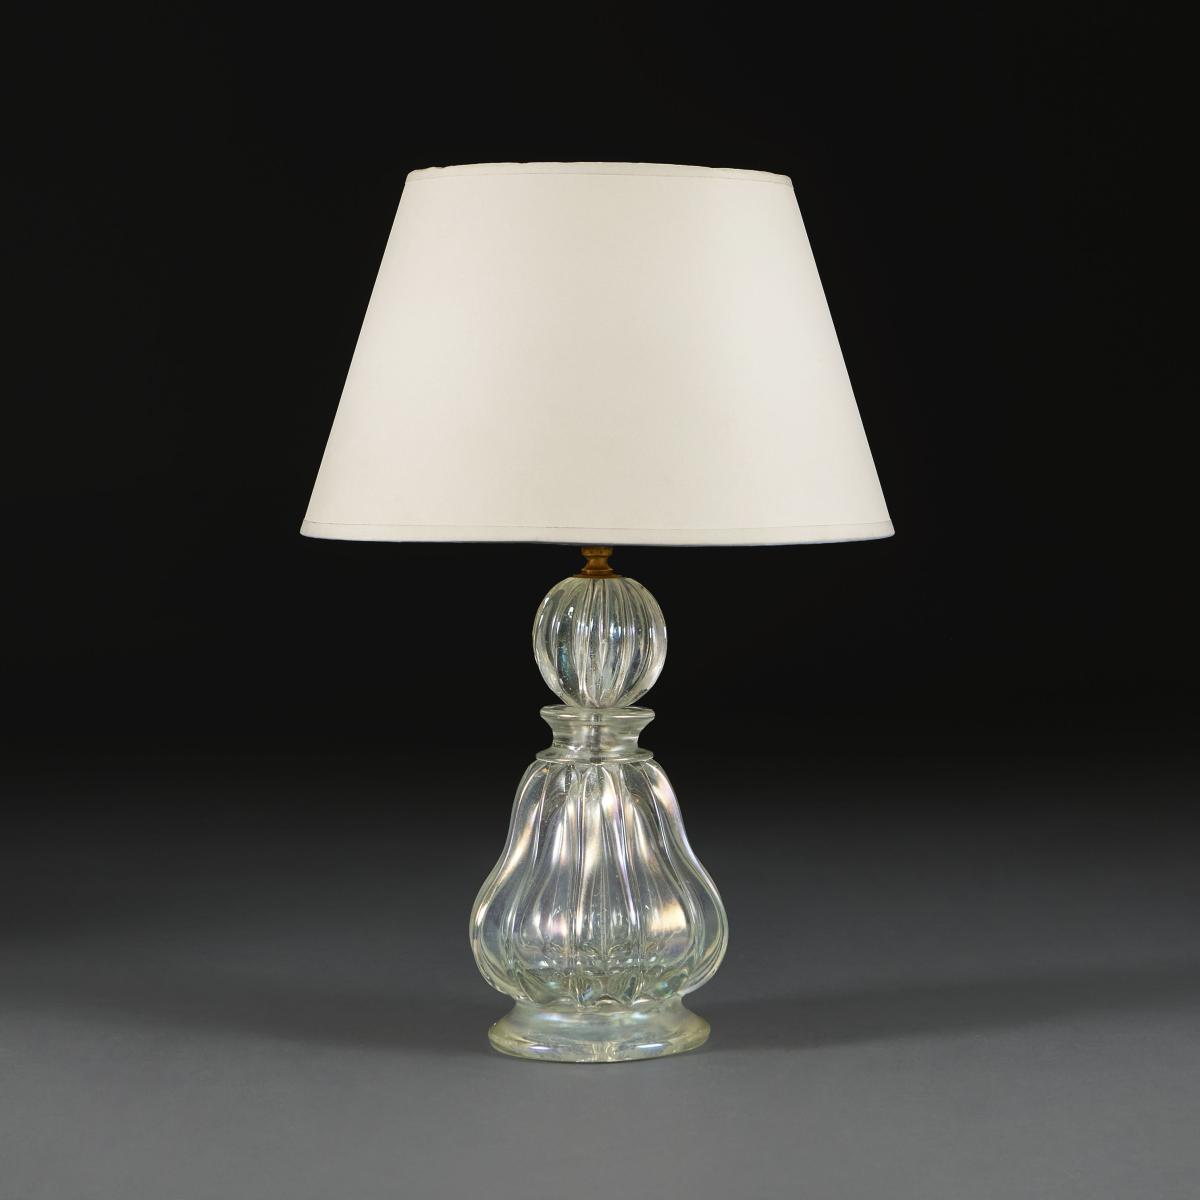 A Ribbed Iridescent Murano Glass Lamp